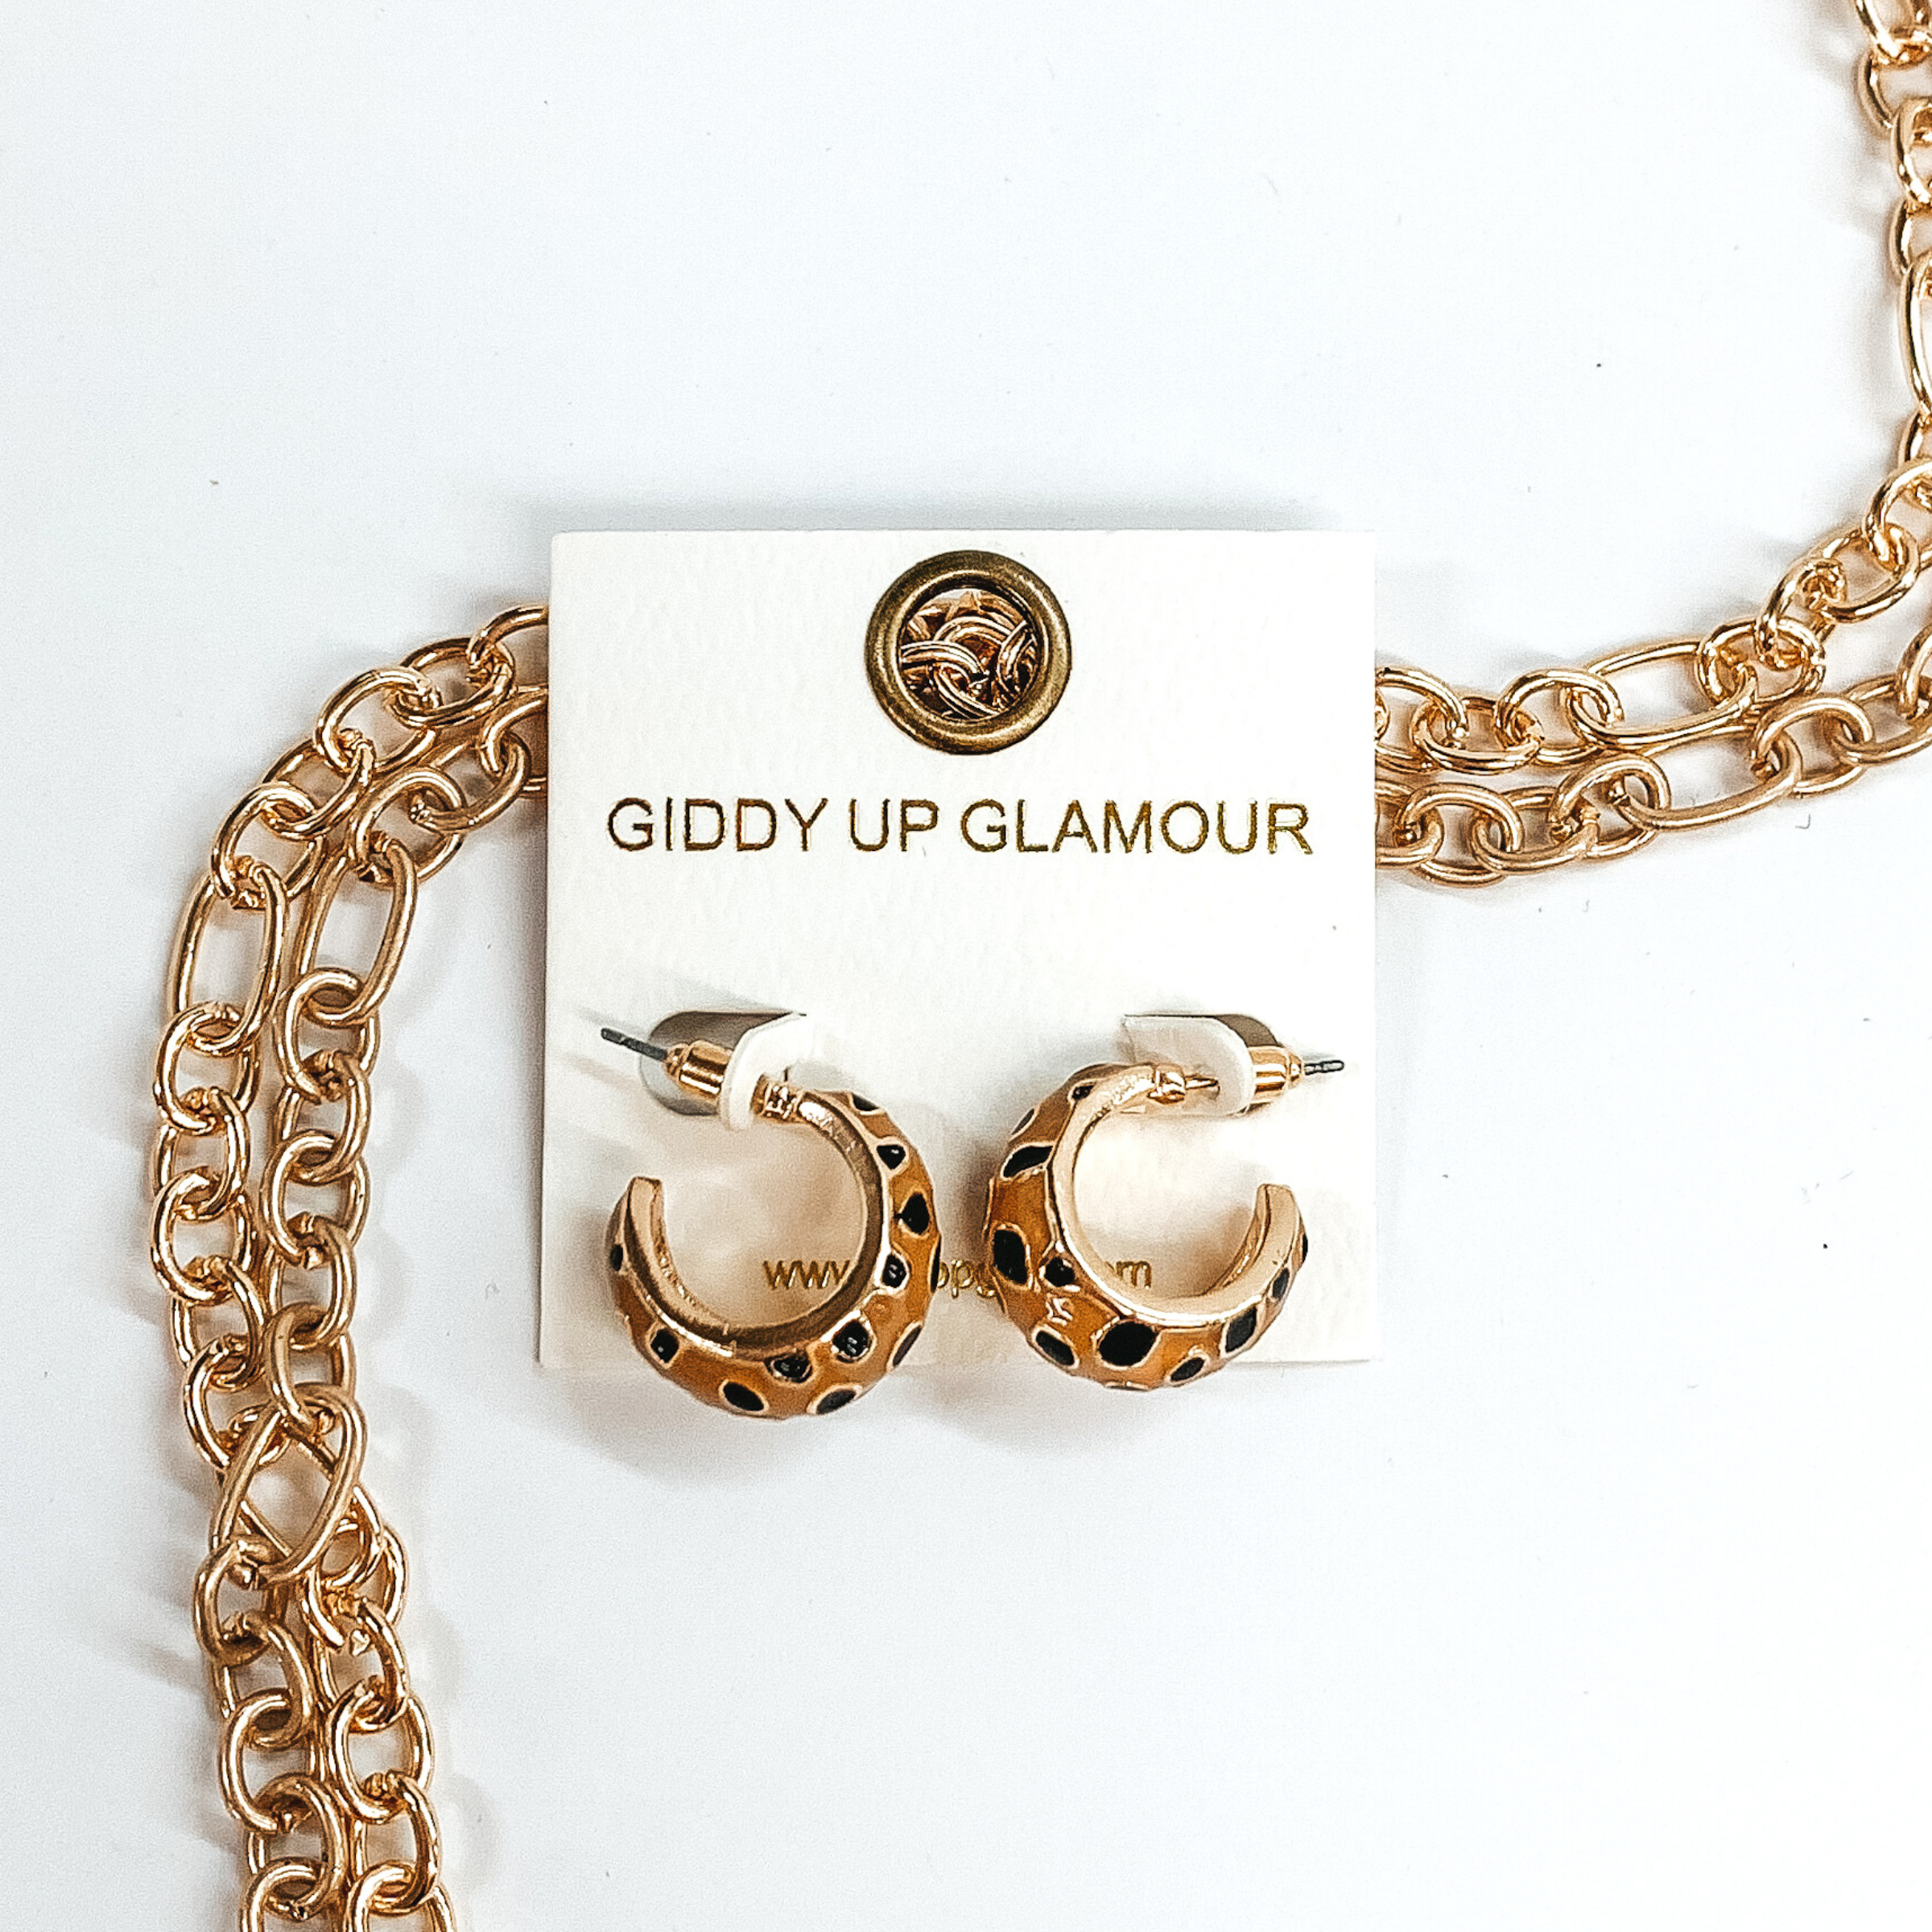 Mini, gold outline, tan hoop huggies with black cheetah print.These earrings are pictured on a white earrings holder, laying on top of gold chains on a white background. 